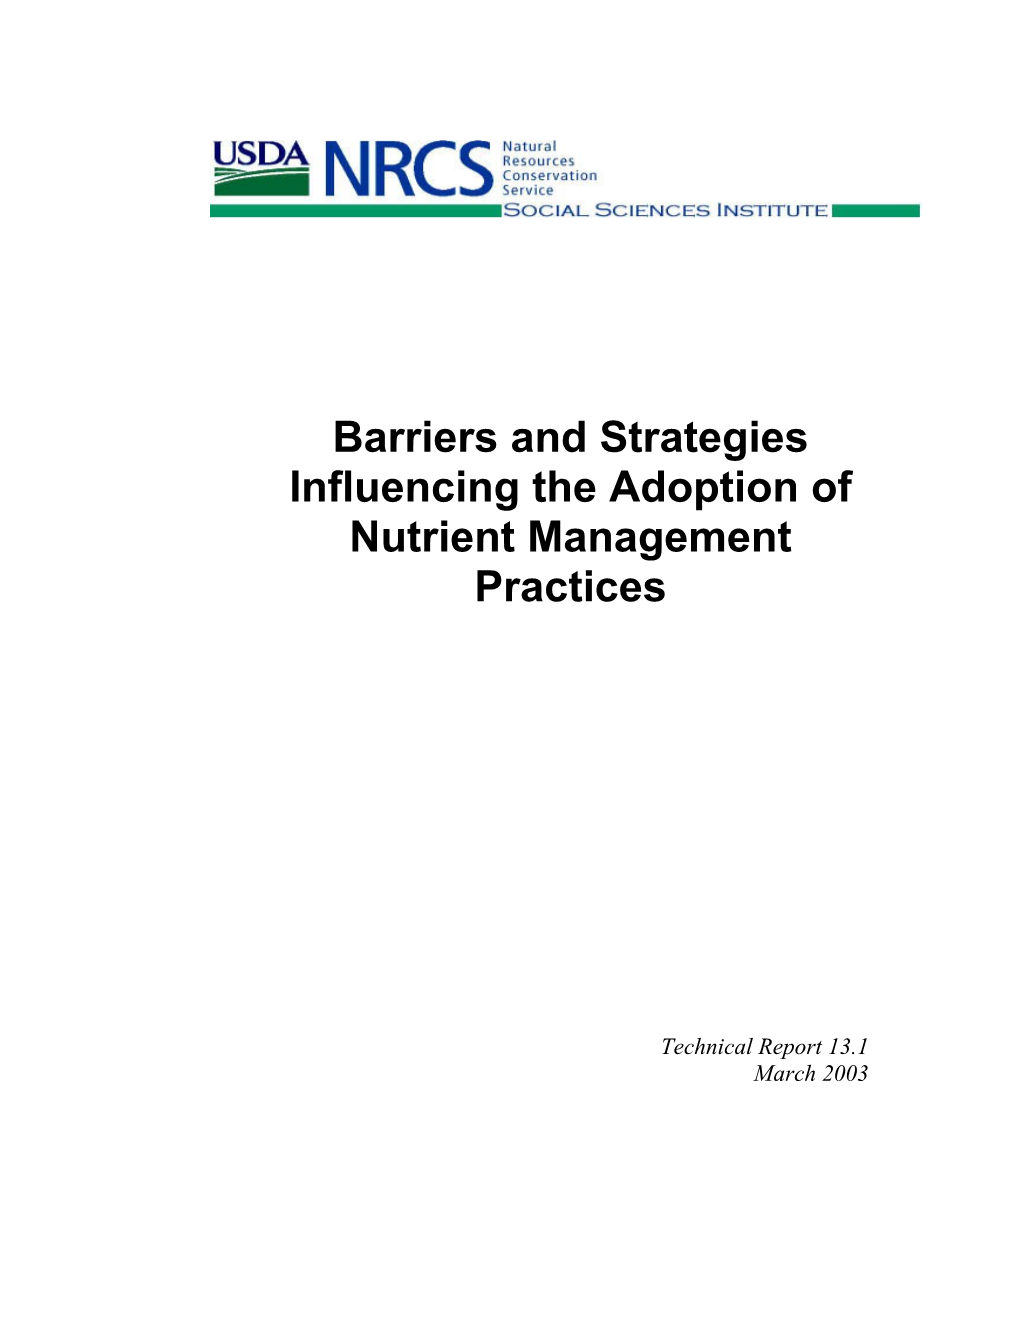 Adoption of Nutrient Management Practices: Barriers and Strategies